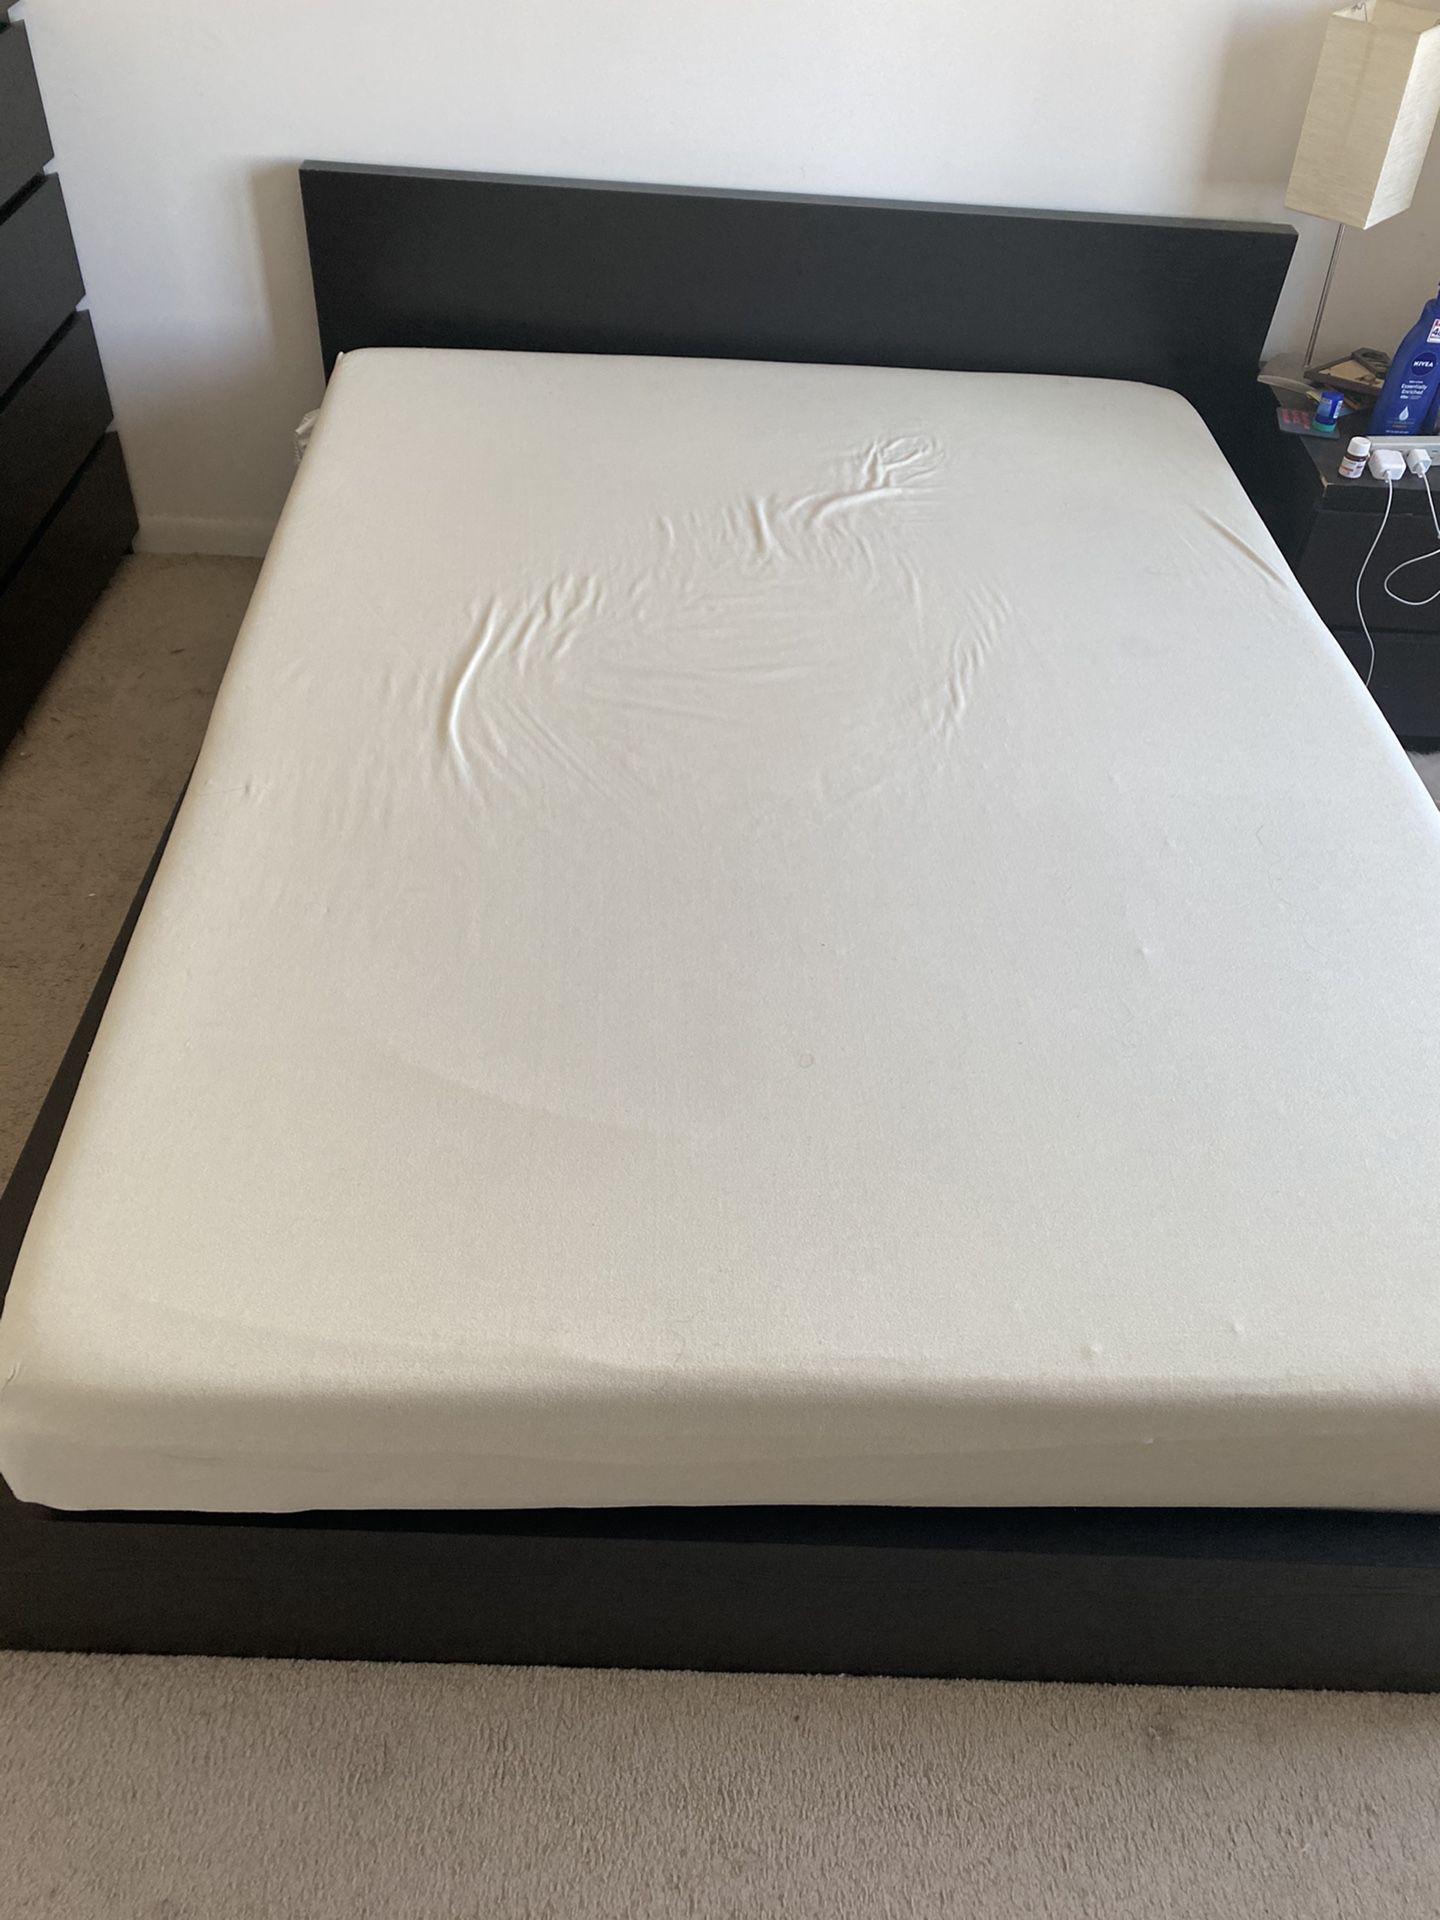 Move out sale/ great deal! Mattress and bed for $160.